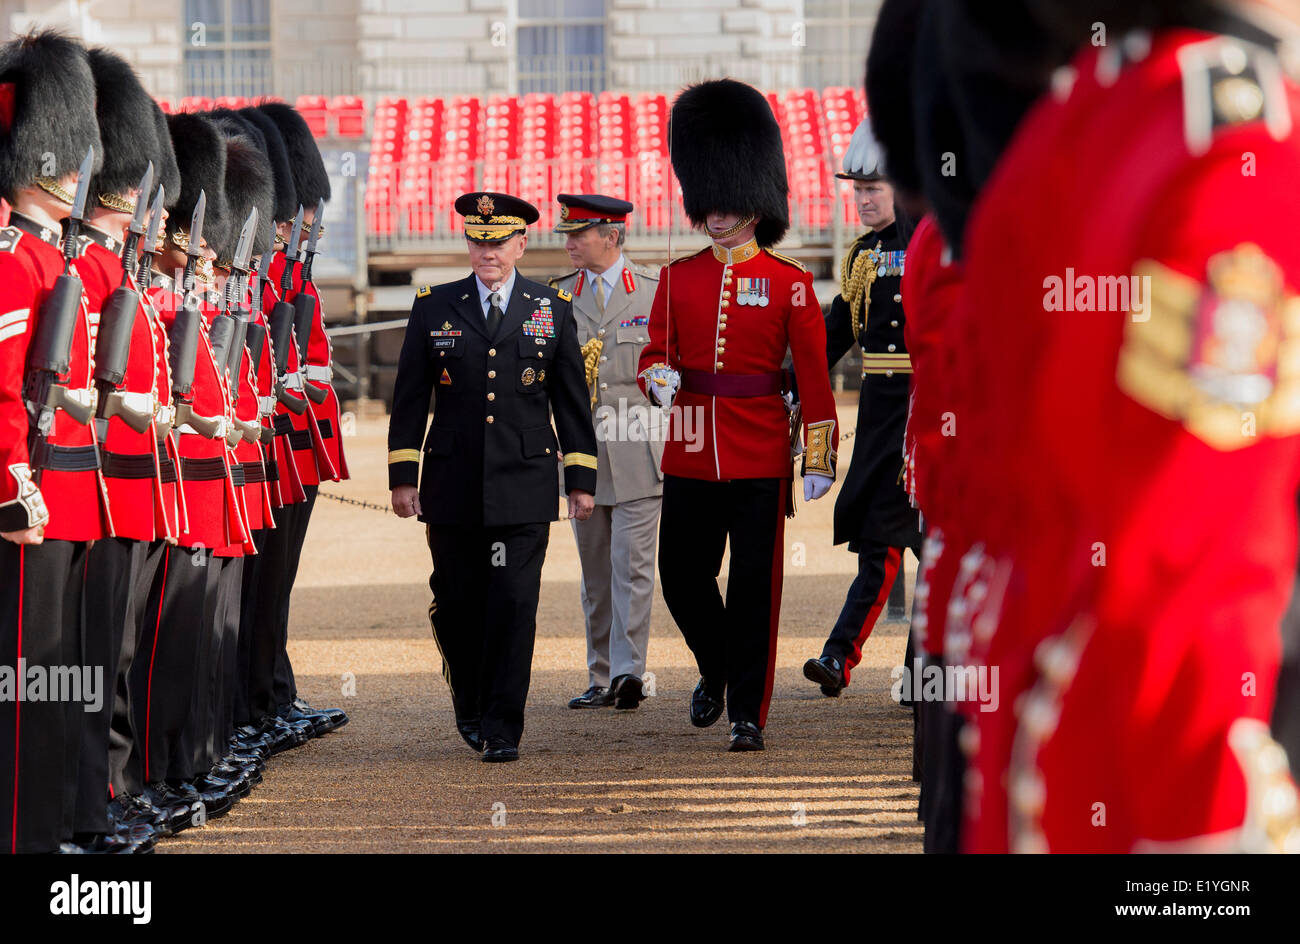 US Chairman of the Joint Chiefs Gen. Martin Dempsey, center left, inspects troops with U.K. Chief of Defense Staff for the British Armed Forces Gen. Sir Nickolas Houghton, center, during a Guard of Honor ceremony kicking off a Defense Chiefs Strategic Dialog June 10, 2014 in London, UK. Stock Photo